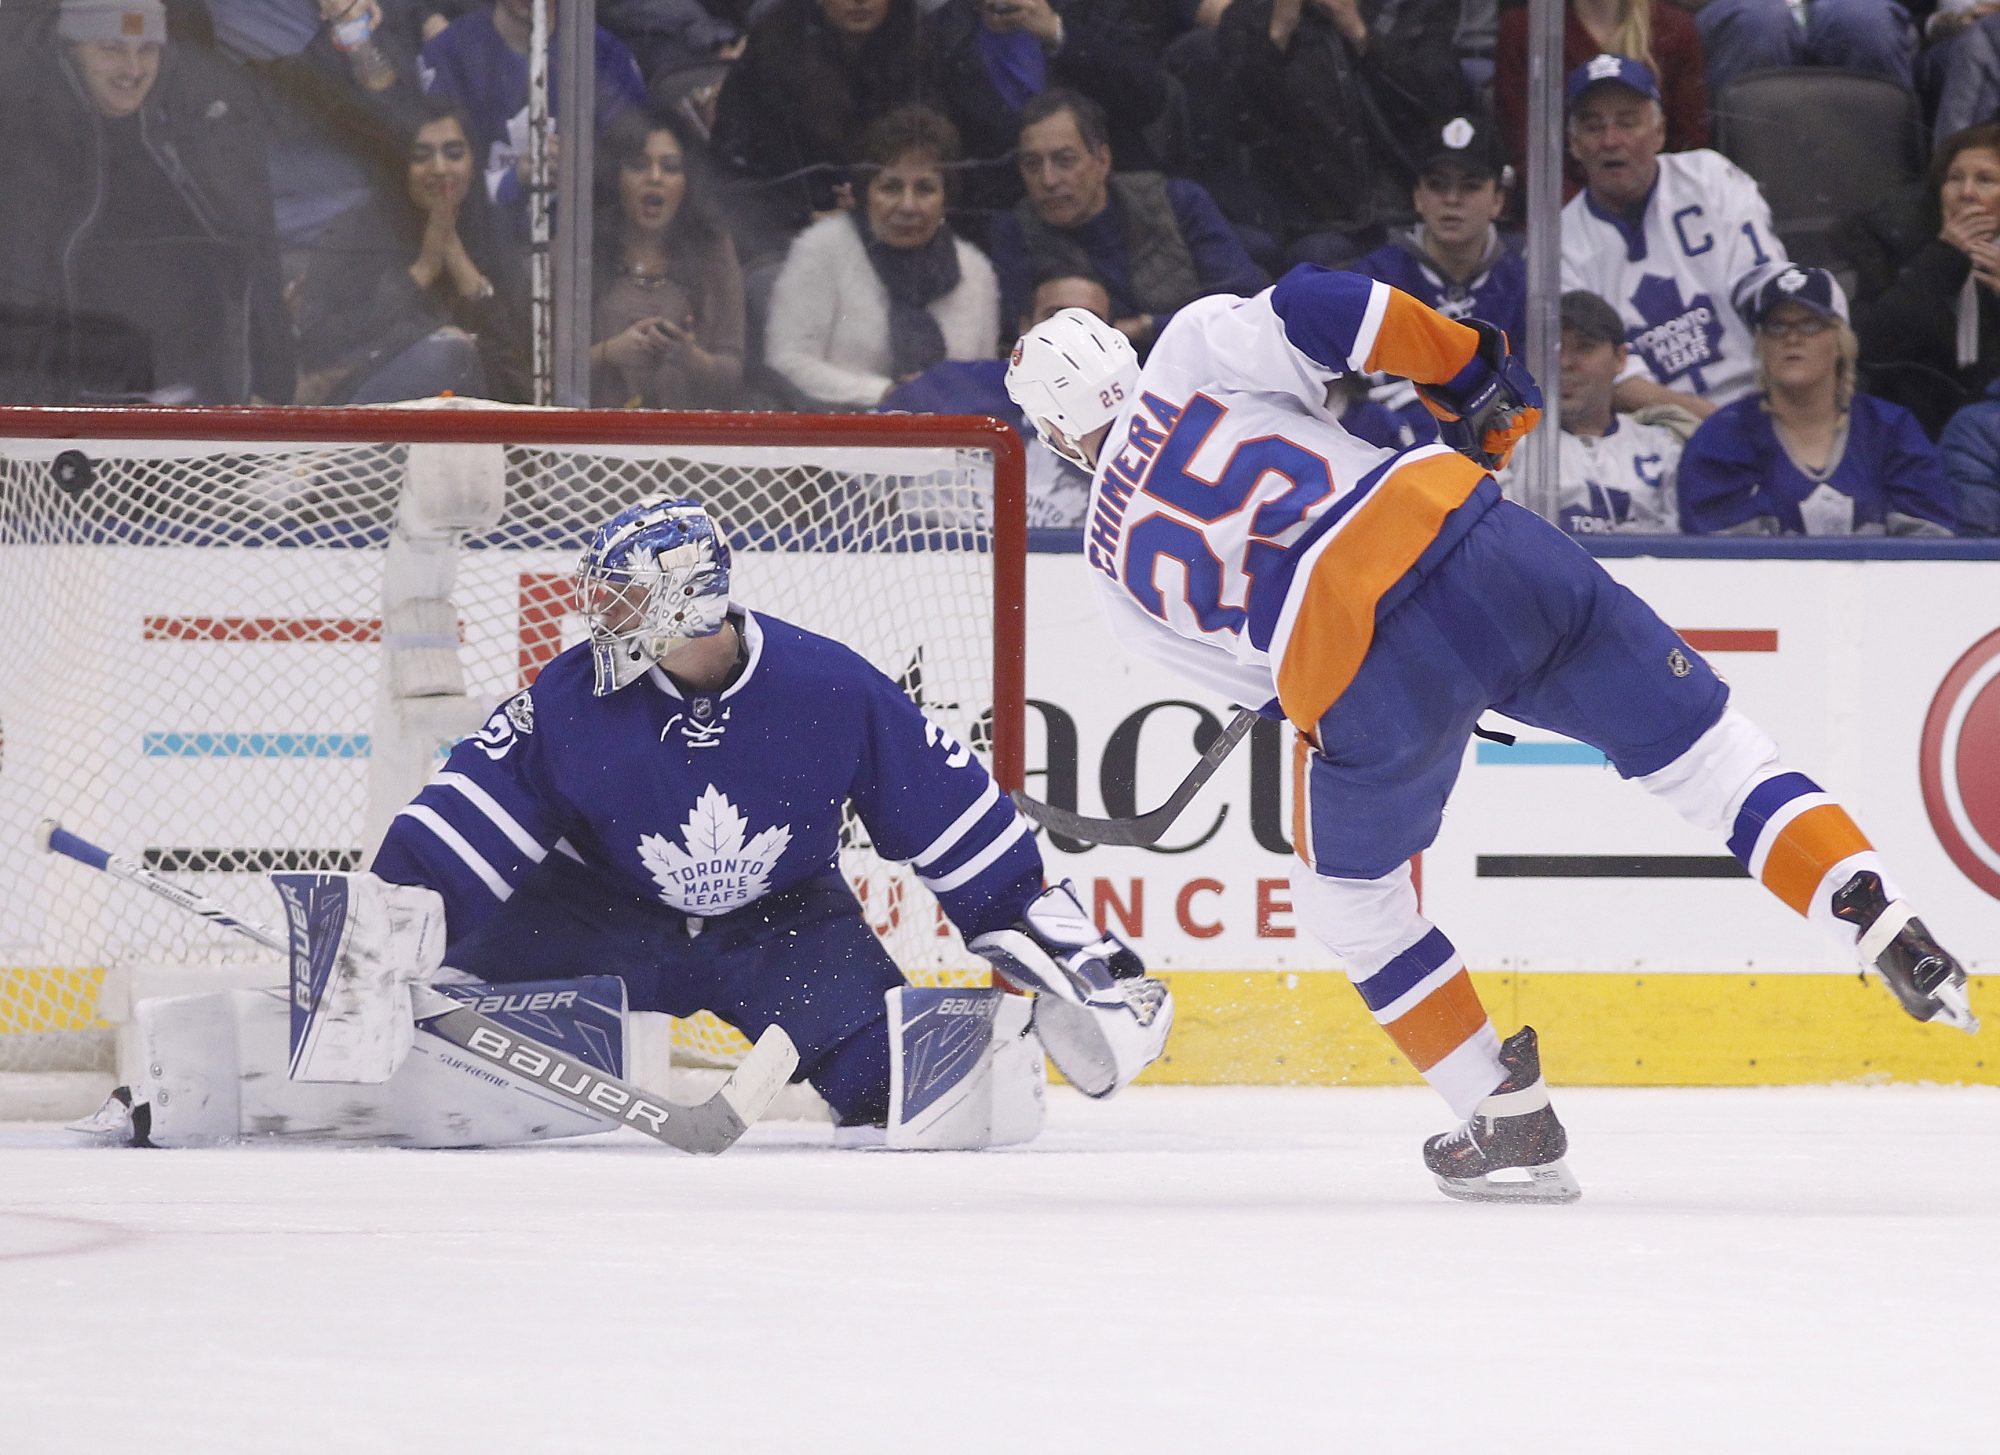 New York Islanders submit to Toronto Maple Leafs in embarrassing 7-1 loss 